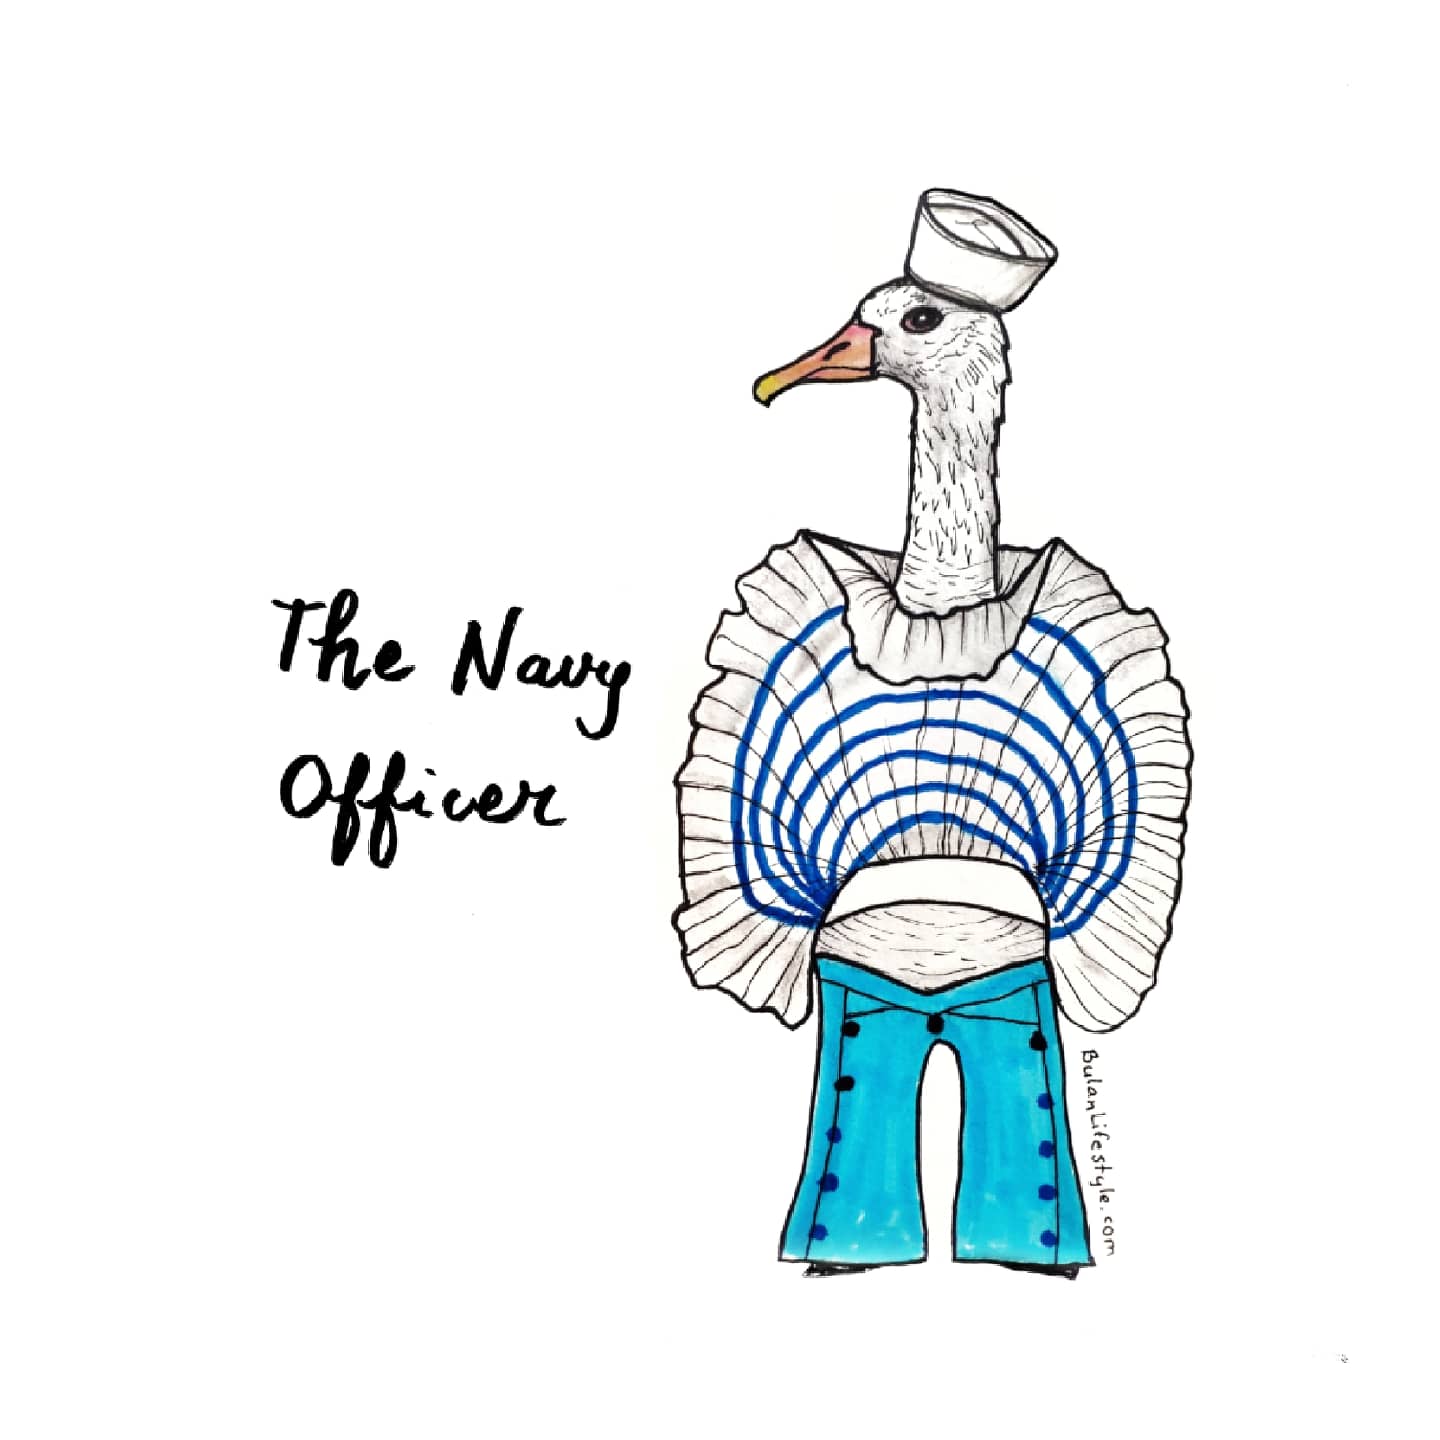 The navy officer